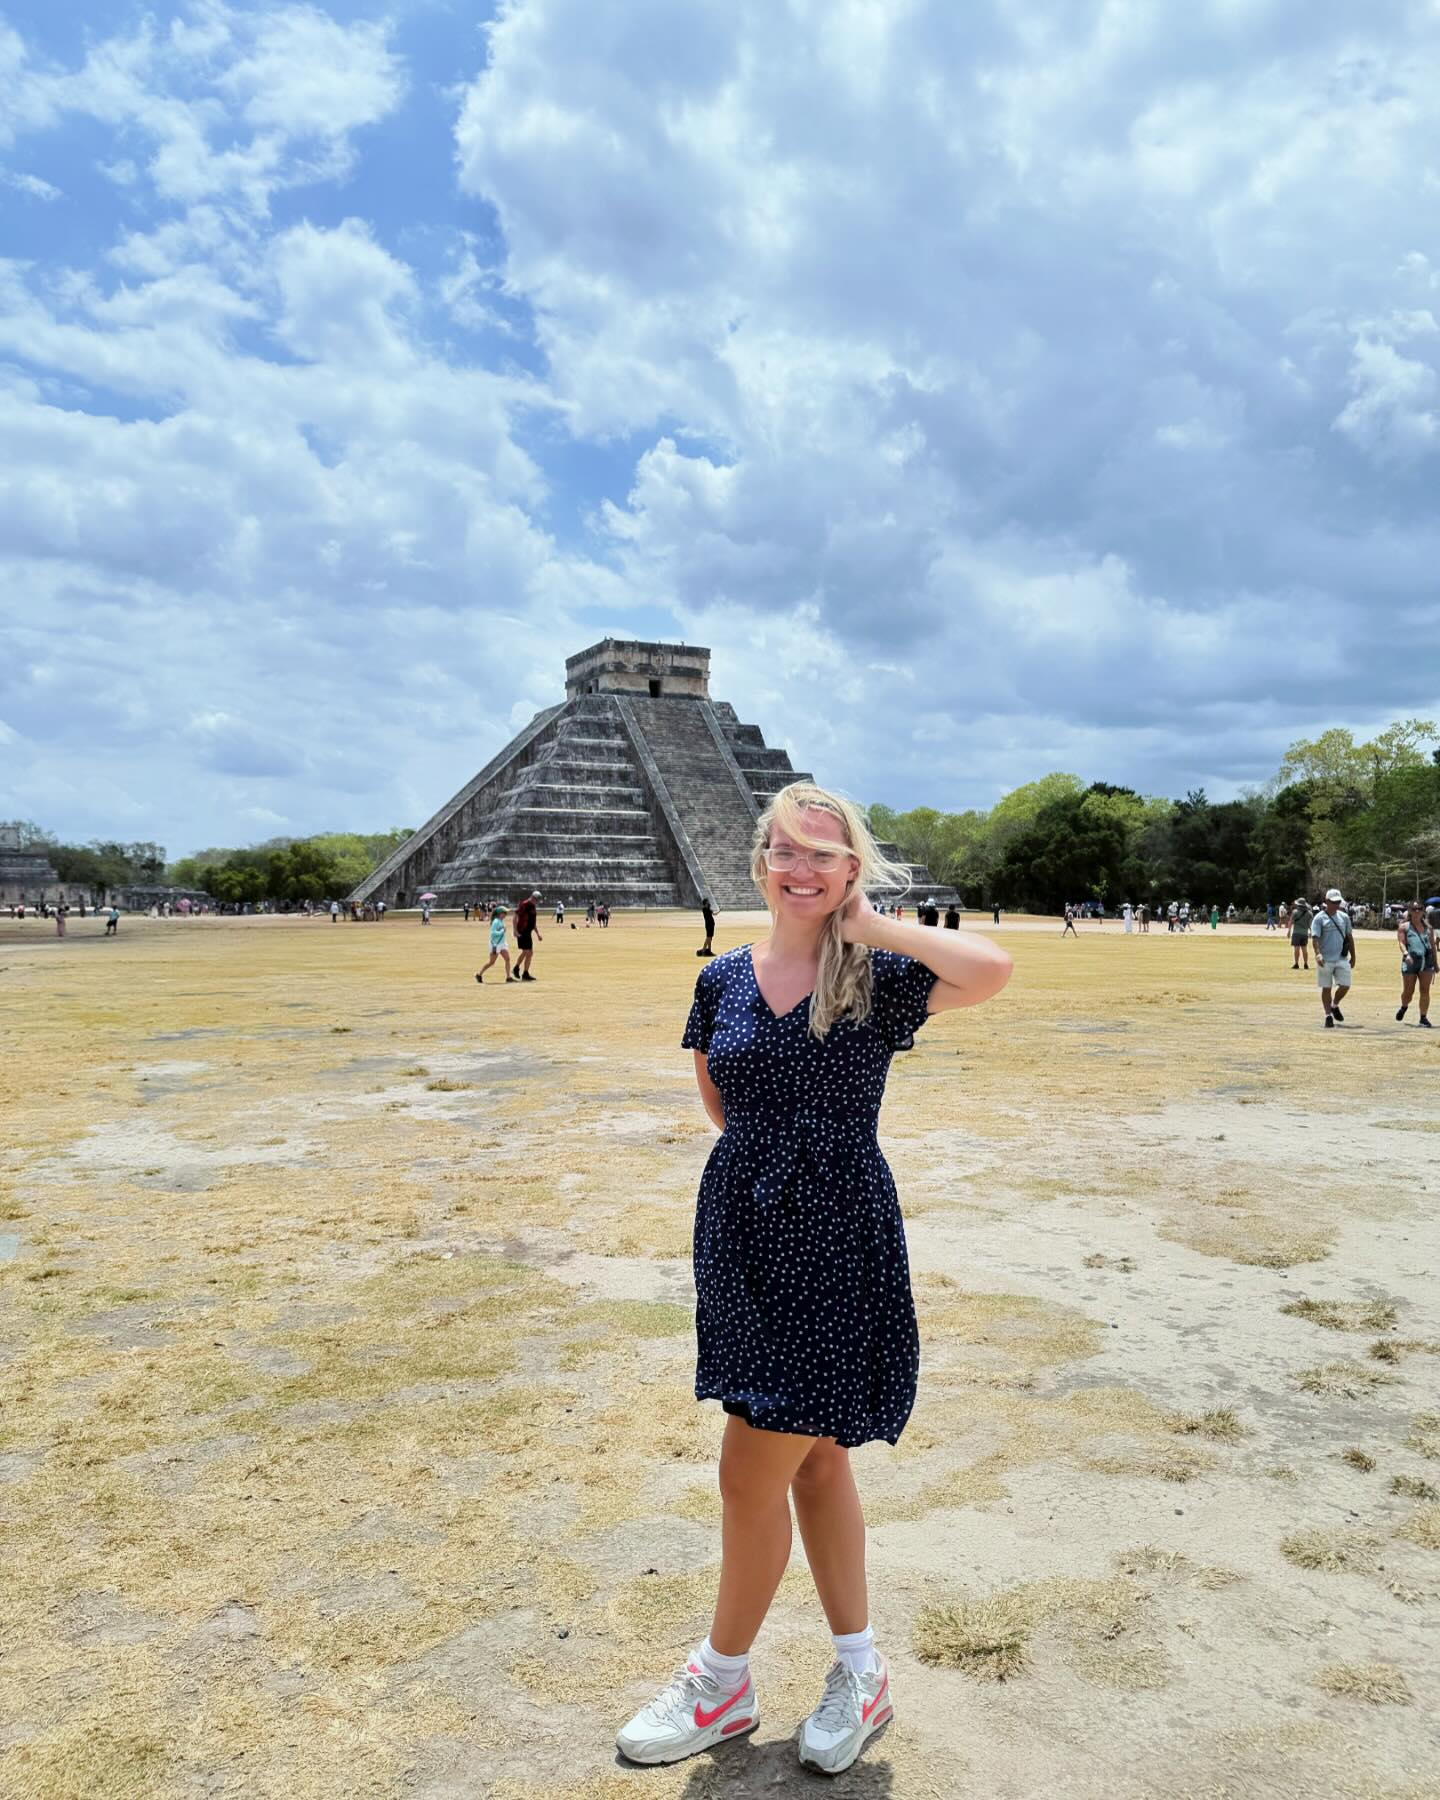 Absolutely love the science behind the Chichén Itzá! #explore #explorepage